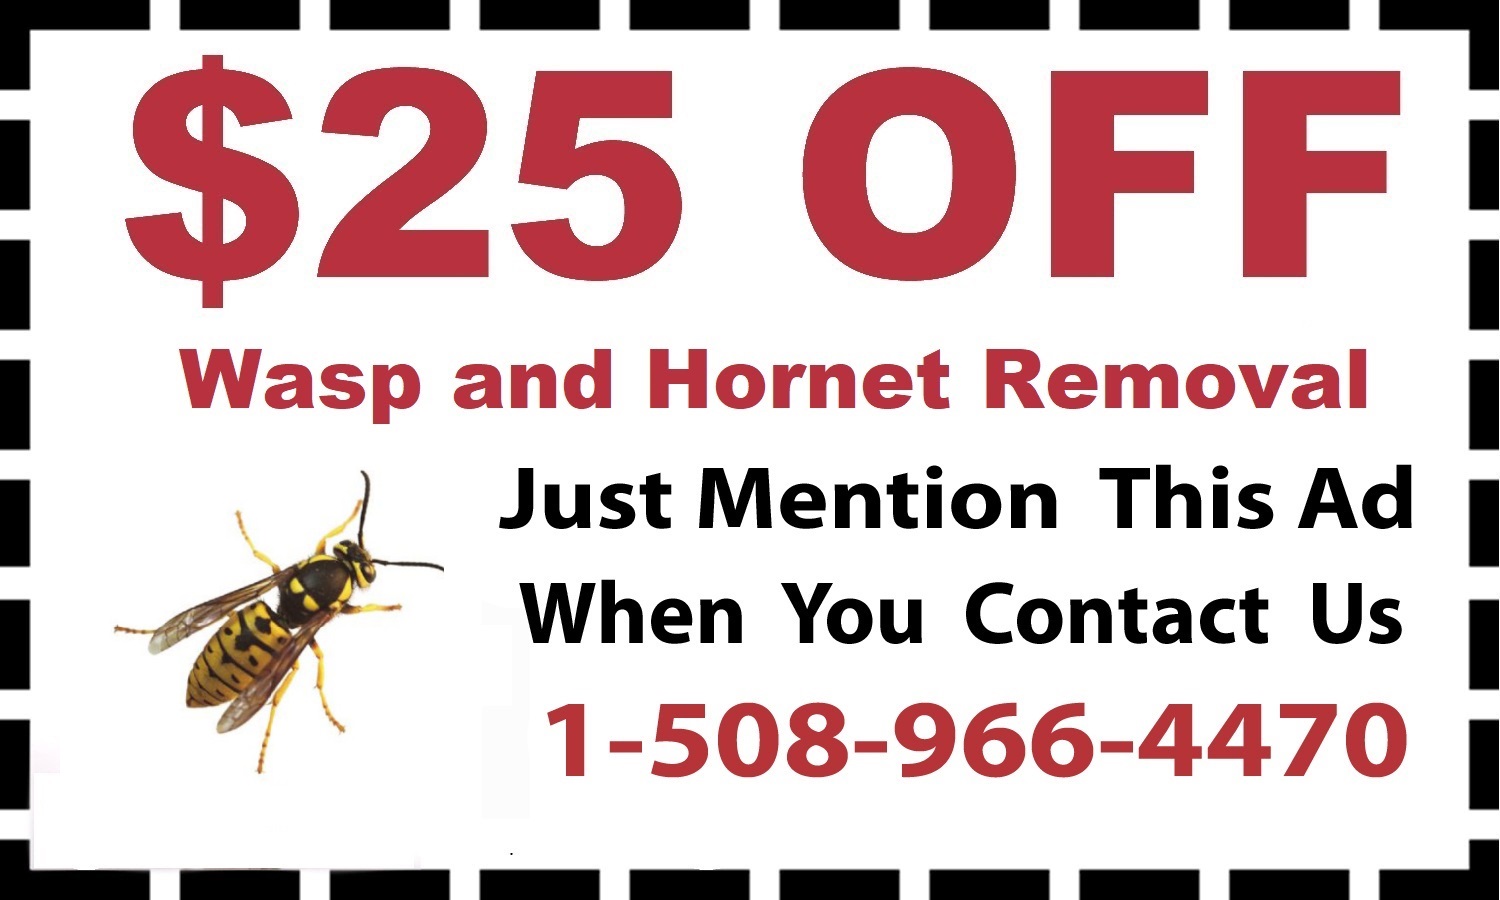 wasp and hornet removal coupon